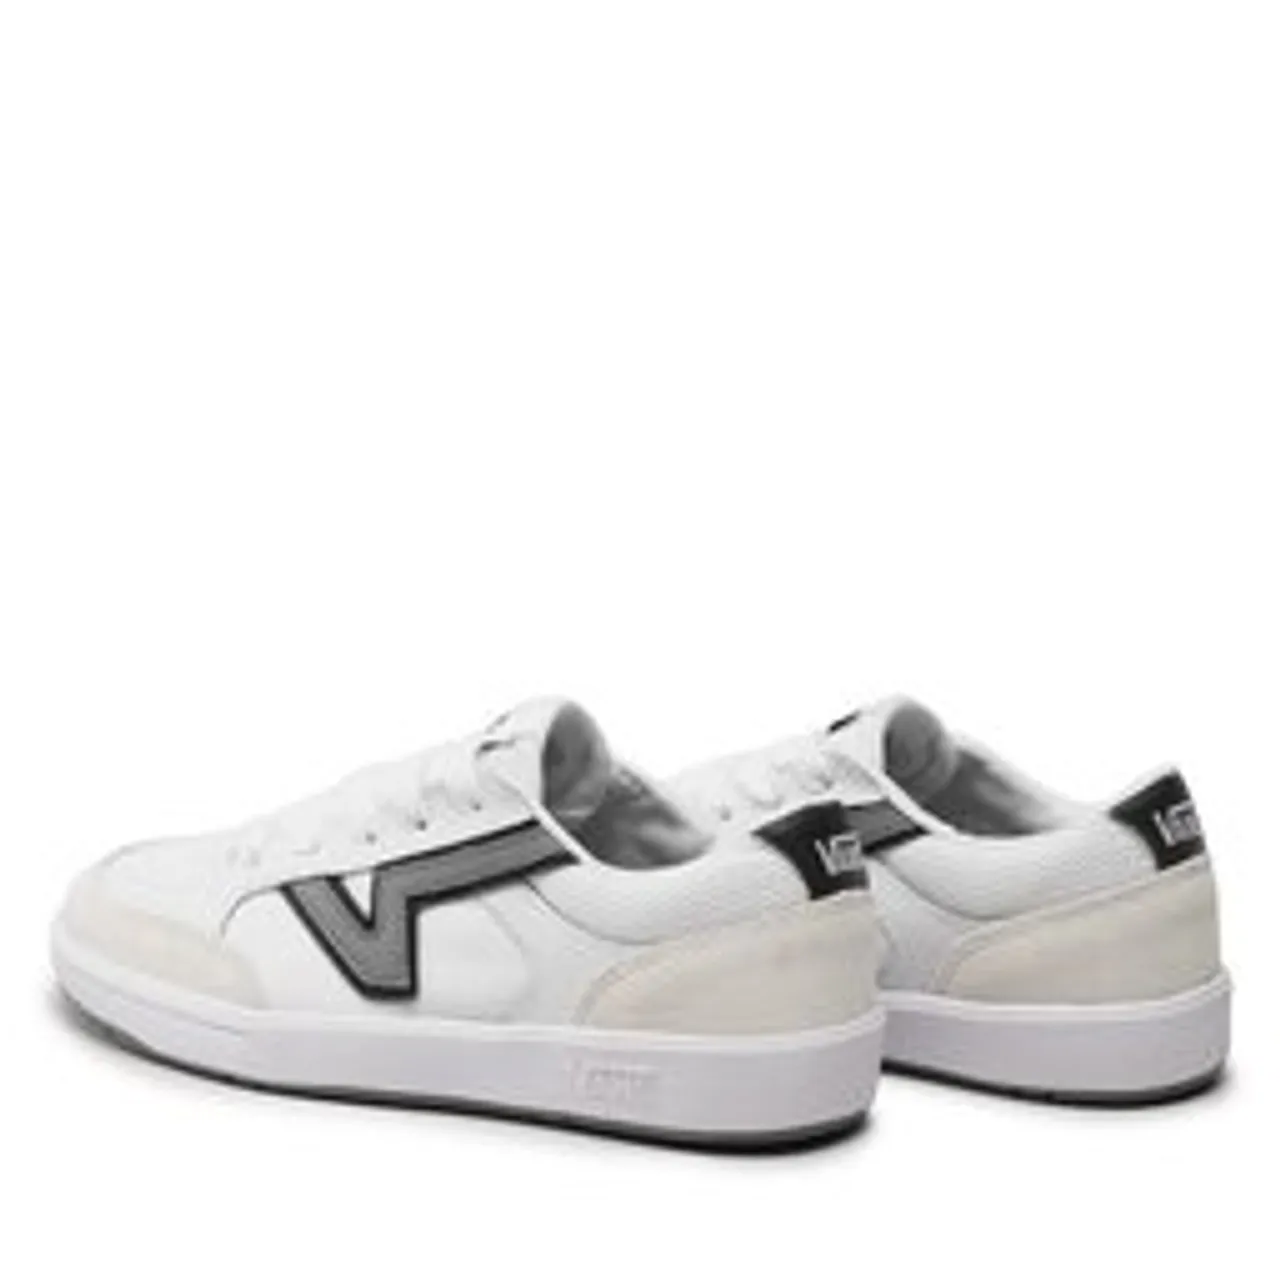 Sneakers aus Stoff Vans Lowland Cc VN0A7TNLIYP1 Sport Drizzle/True White